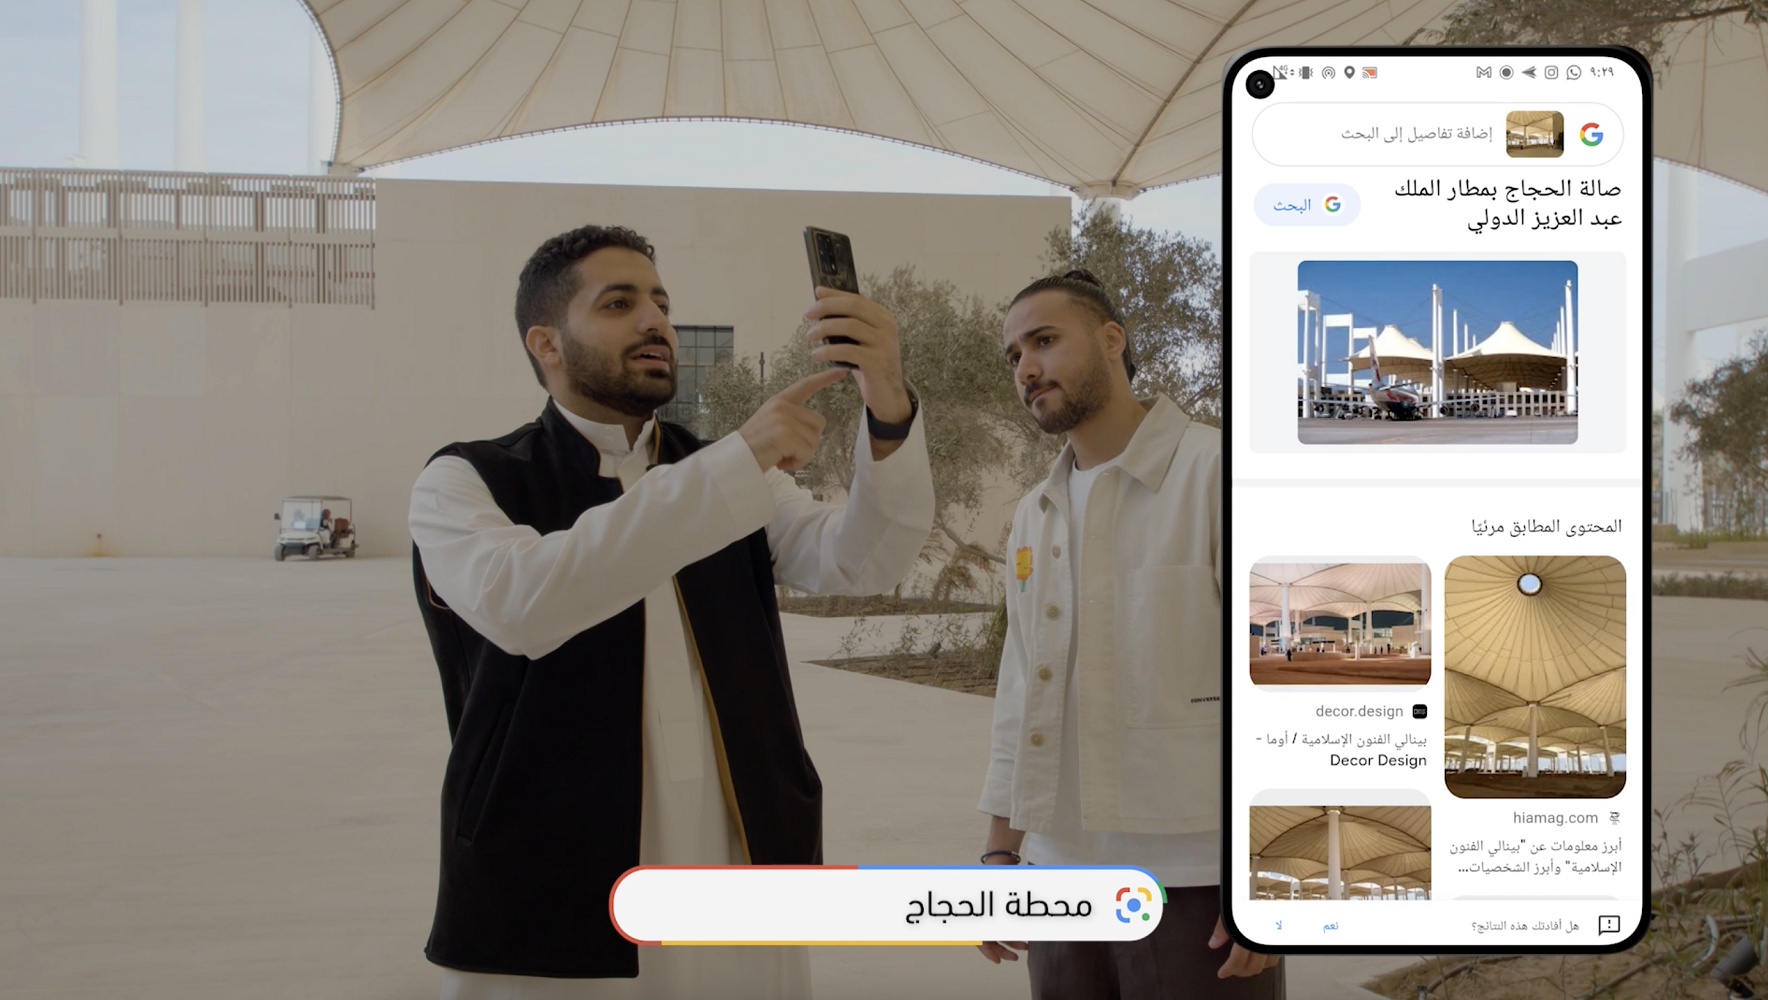 Google Launches Short Video Series on Social Media to Promote Tourism in Saudi Arabia